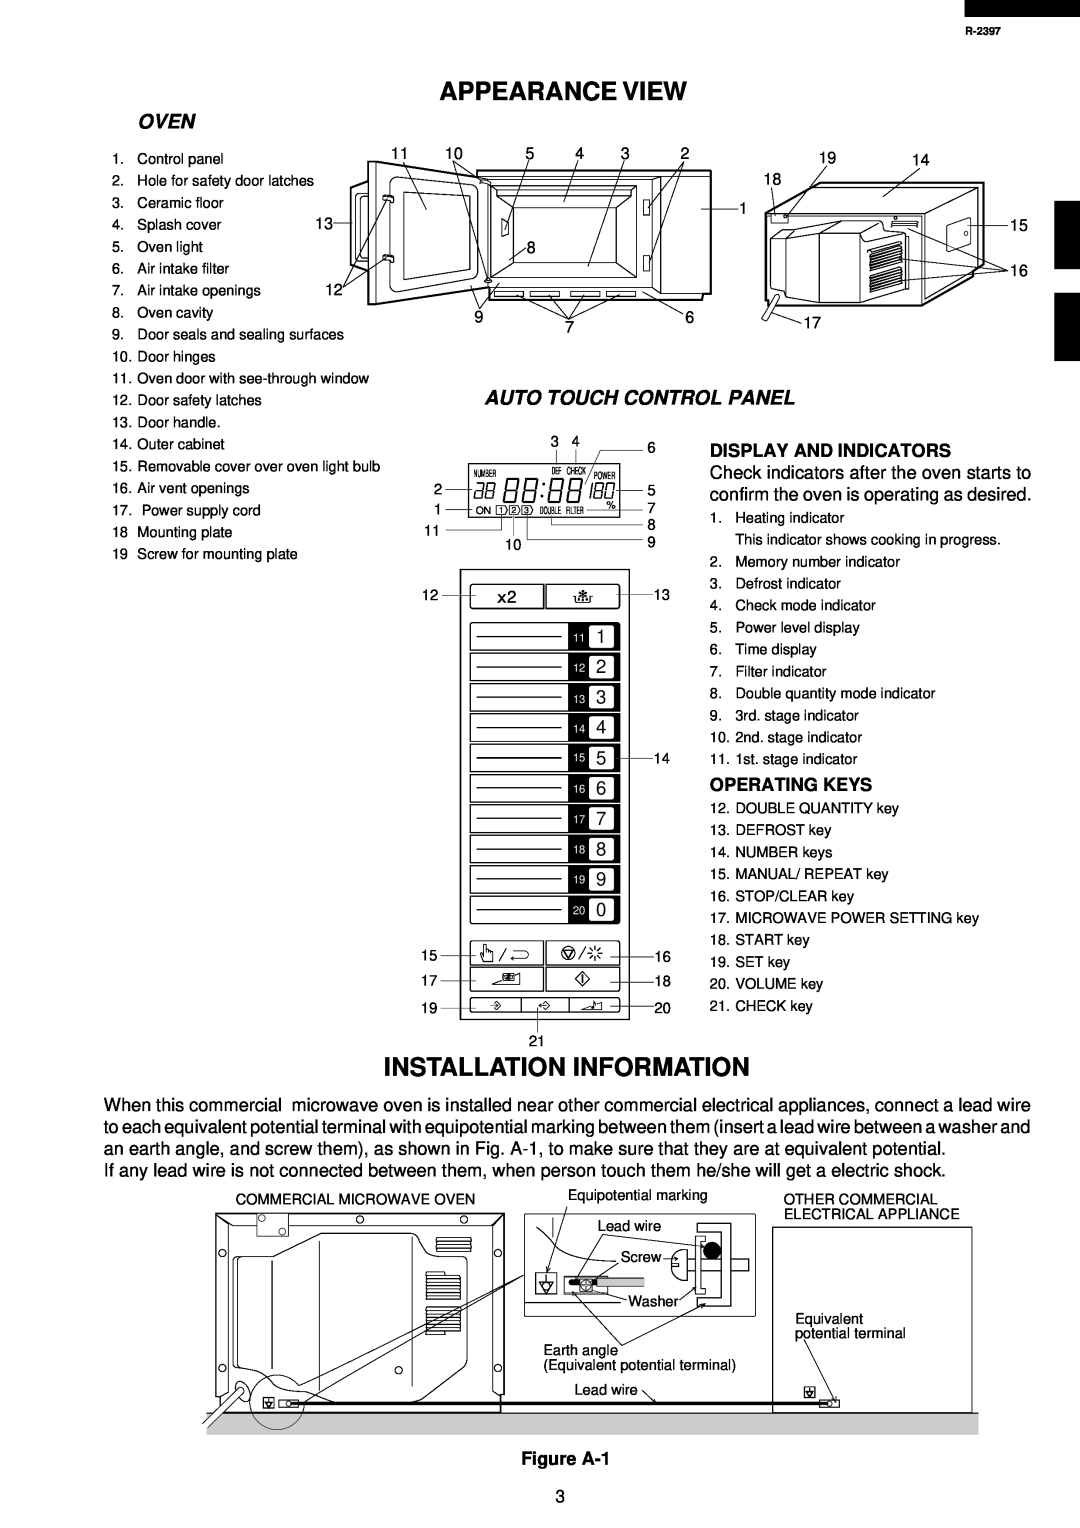 Sharp R-2397 service manual Appearance View, Installation Information, Oven, Auto Touch Control Panel 